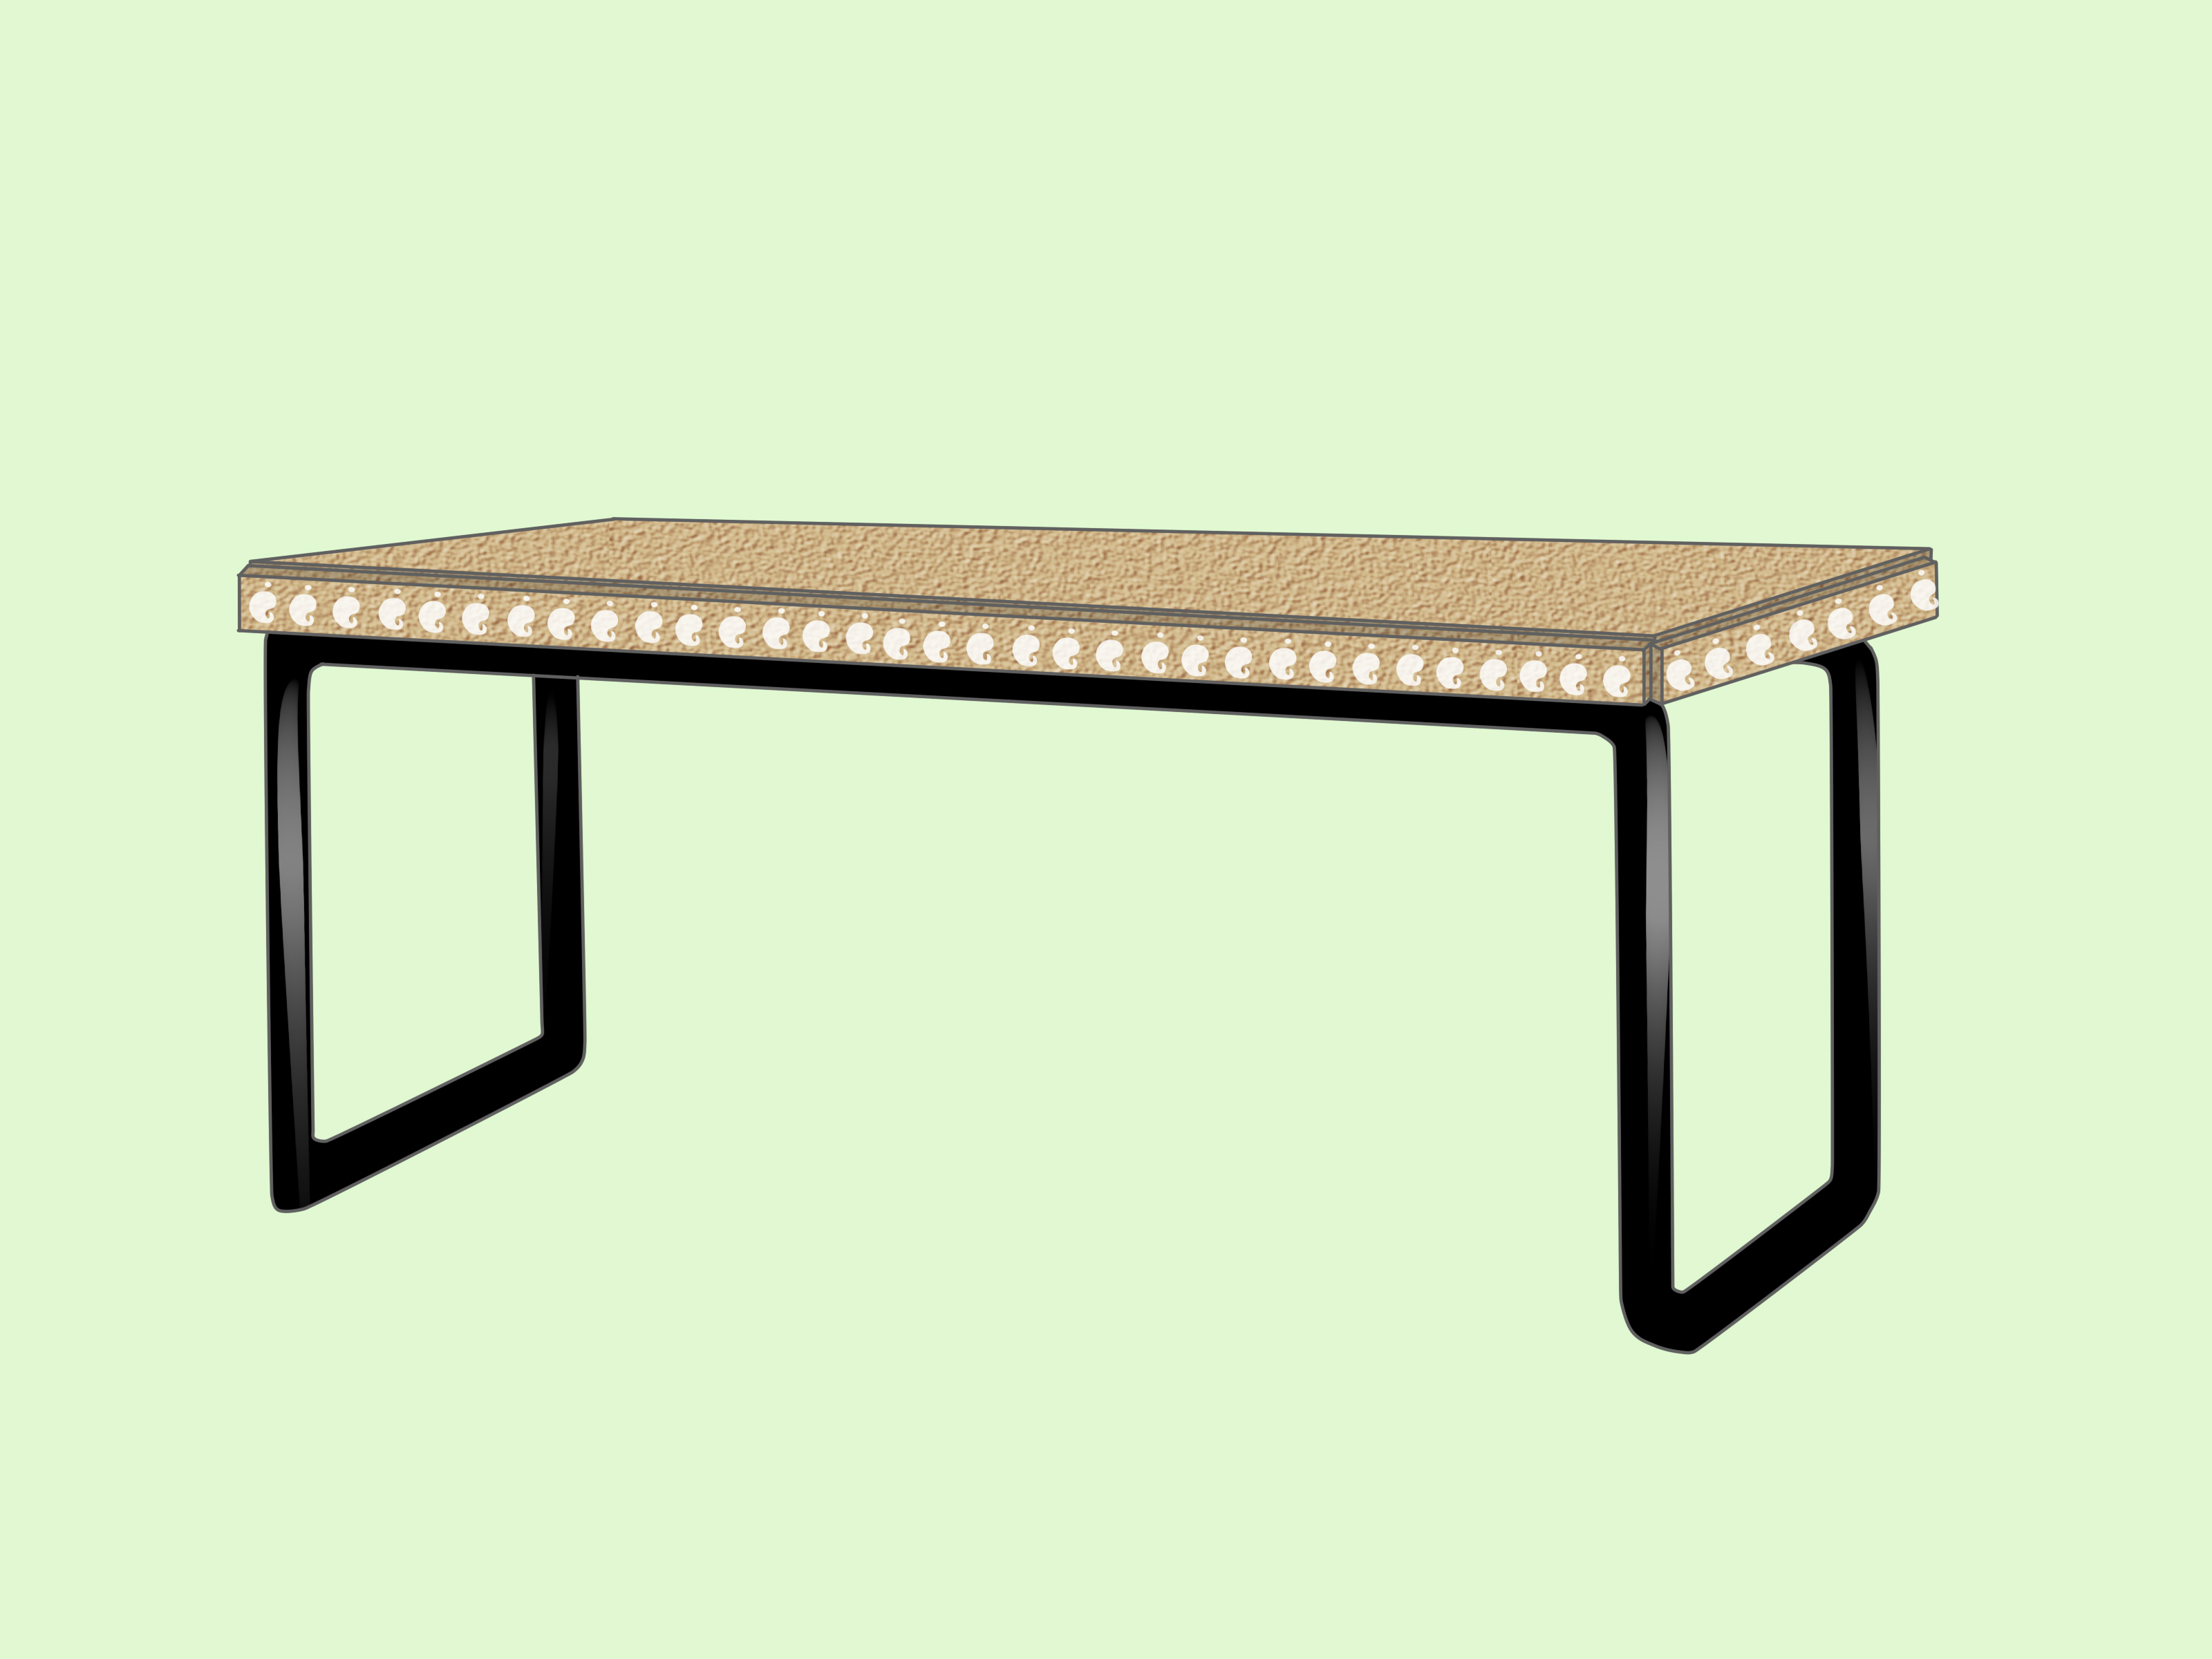 How to Make a Cork Bench: 14 Steps (with Pictures) - wikiHow